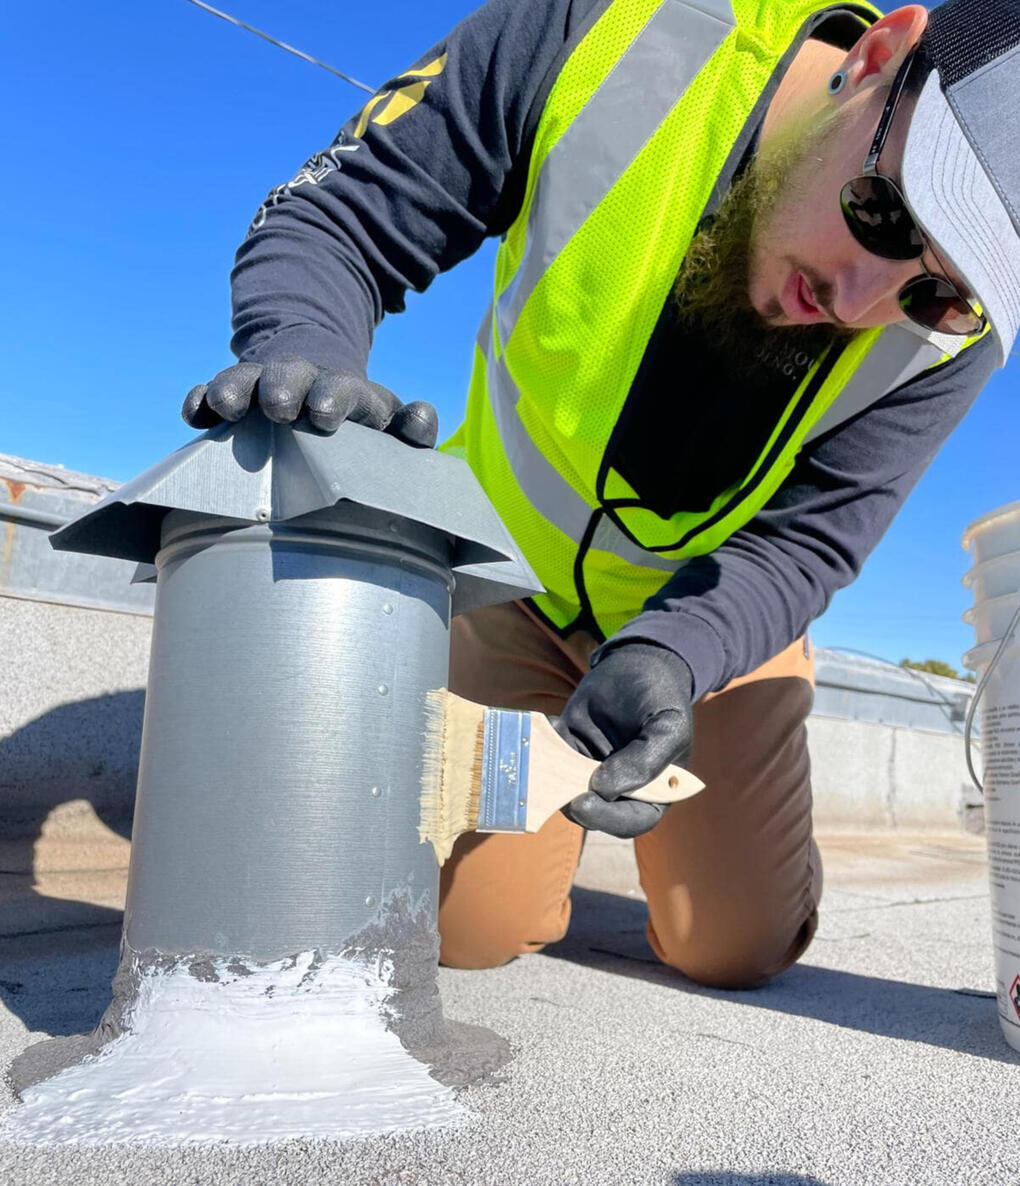 Paramount Roofing employee conducting a repair on a vent located on a flat roof in Albuquerque, New Mexico, demonstrating expertise in maintenance.